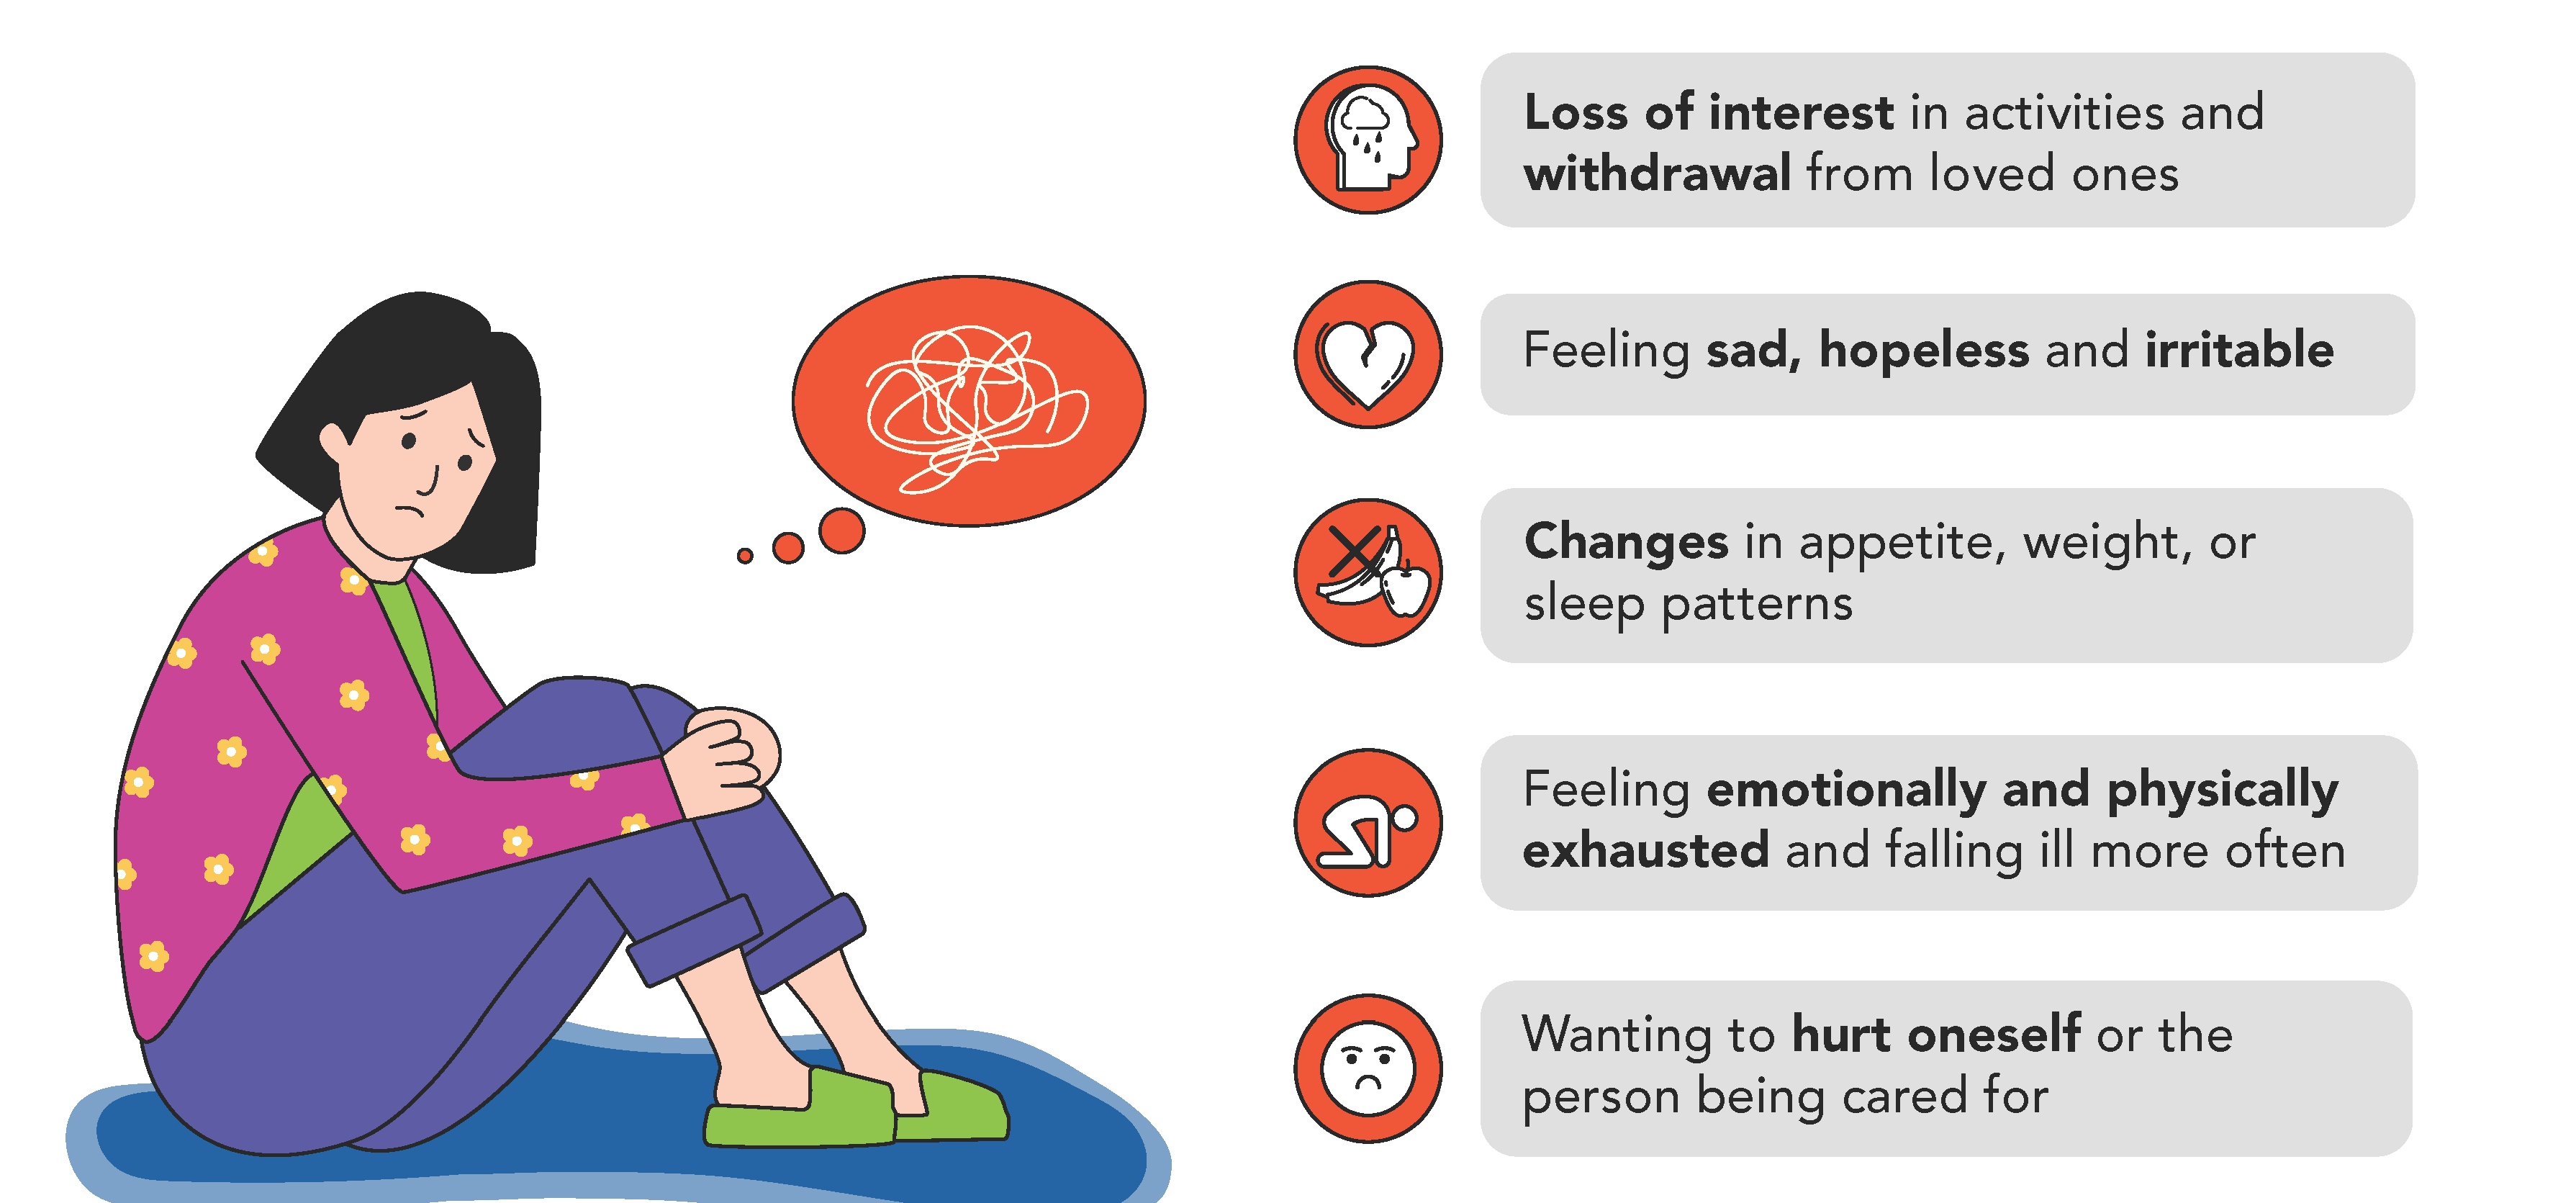 Symptoms of caregiver burnout include: (1) Loss of interest in activities and withdrawal from loved ones, (2) Feeling sad, hopeless and irritable, (3) Changes in appetite, weight or sleep patterns, (4) Feeling emotionally and physically exhausted and falling ill more often, (5) Wanting to hurt oneself or the person being cared for